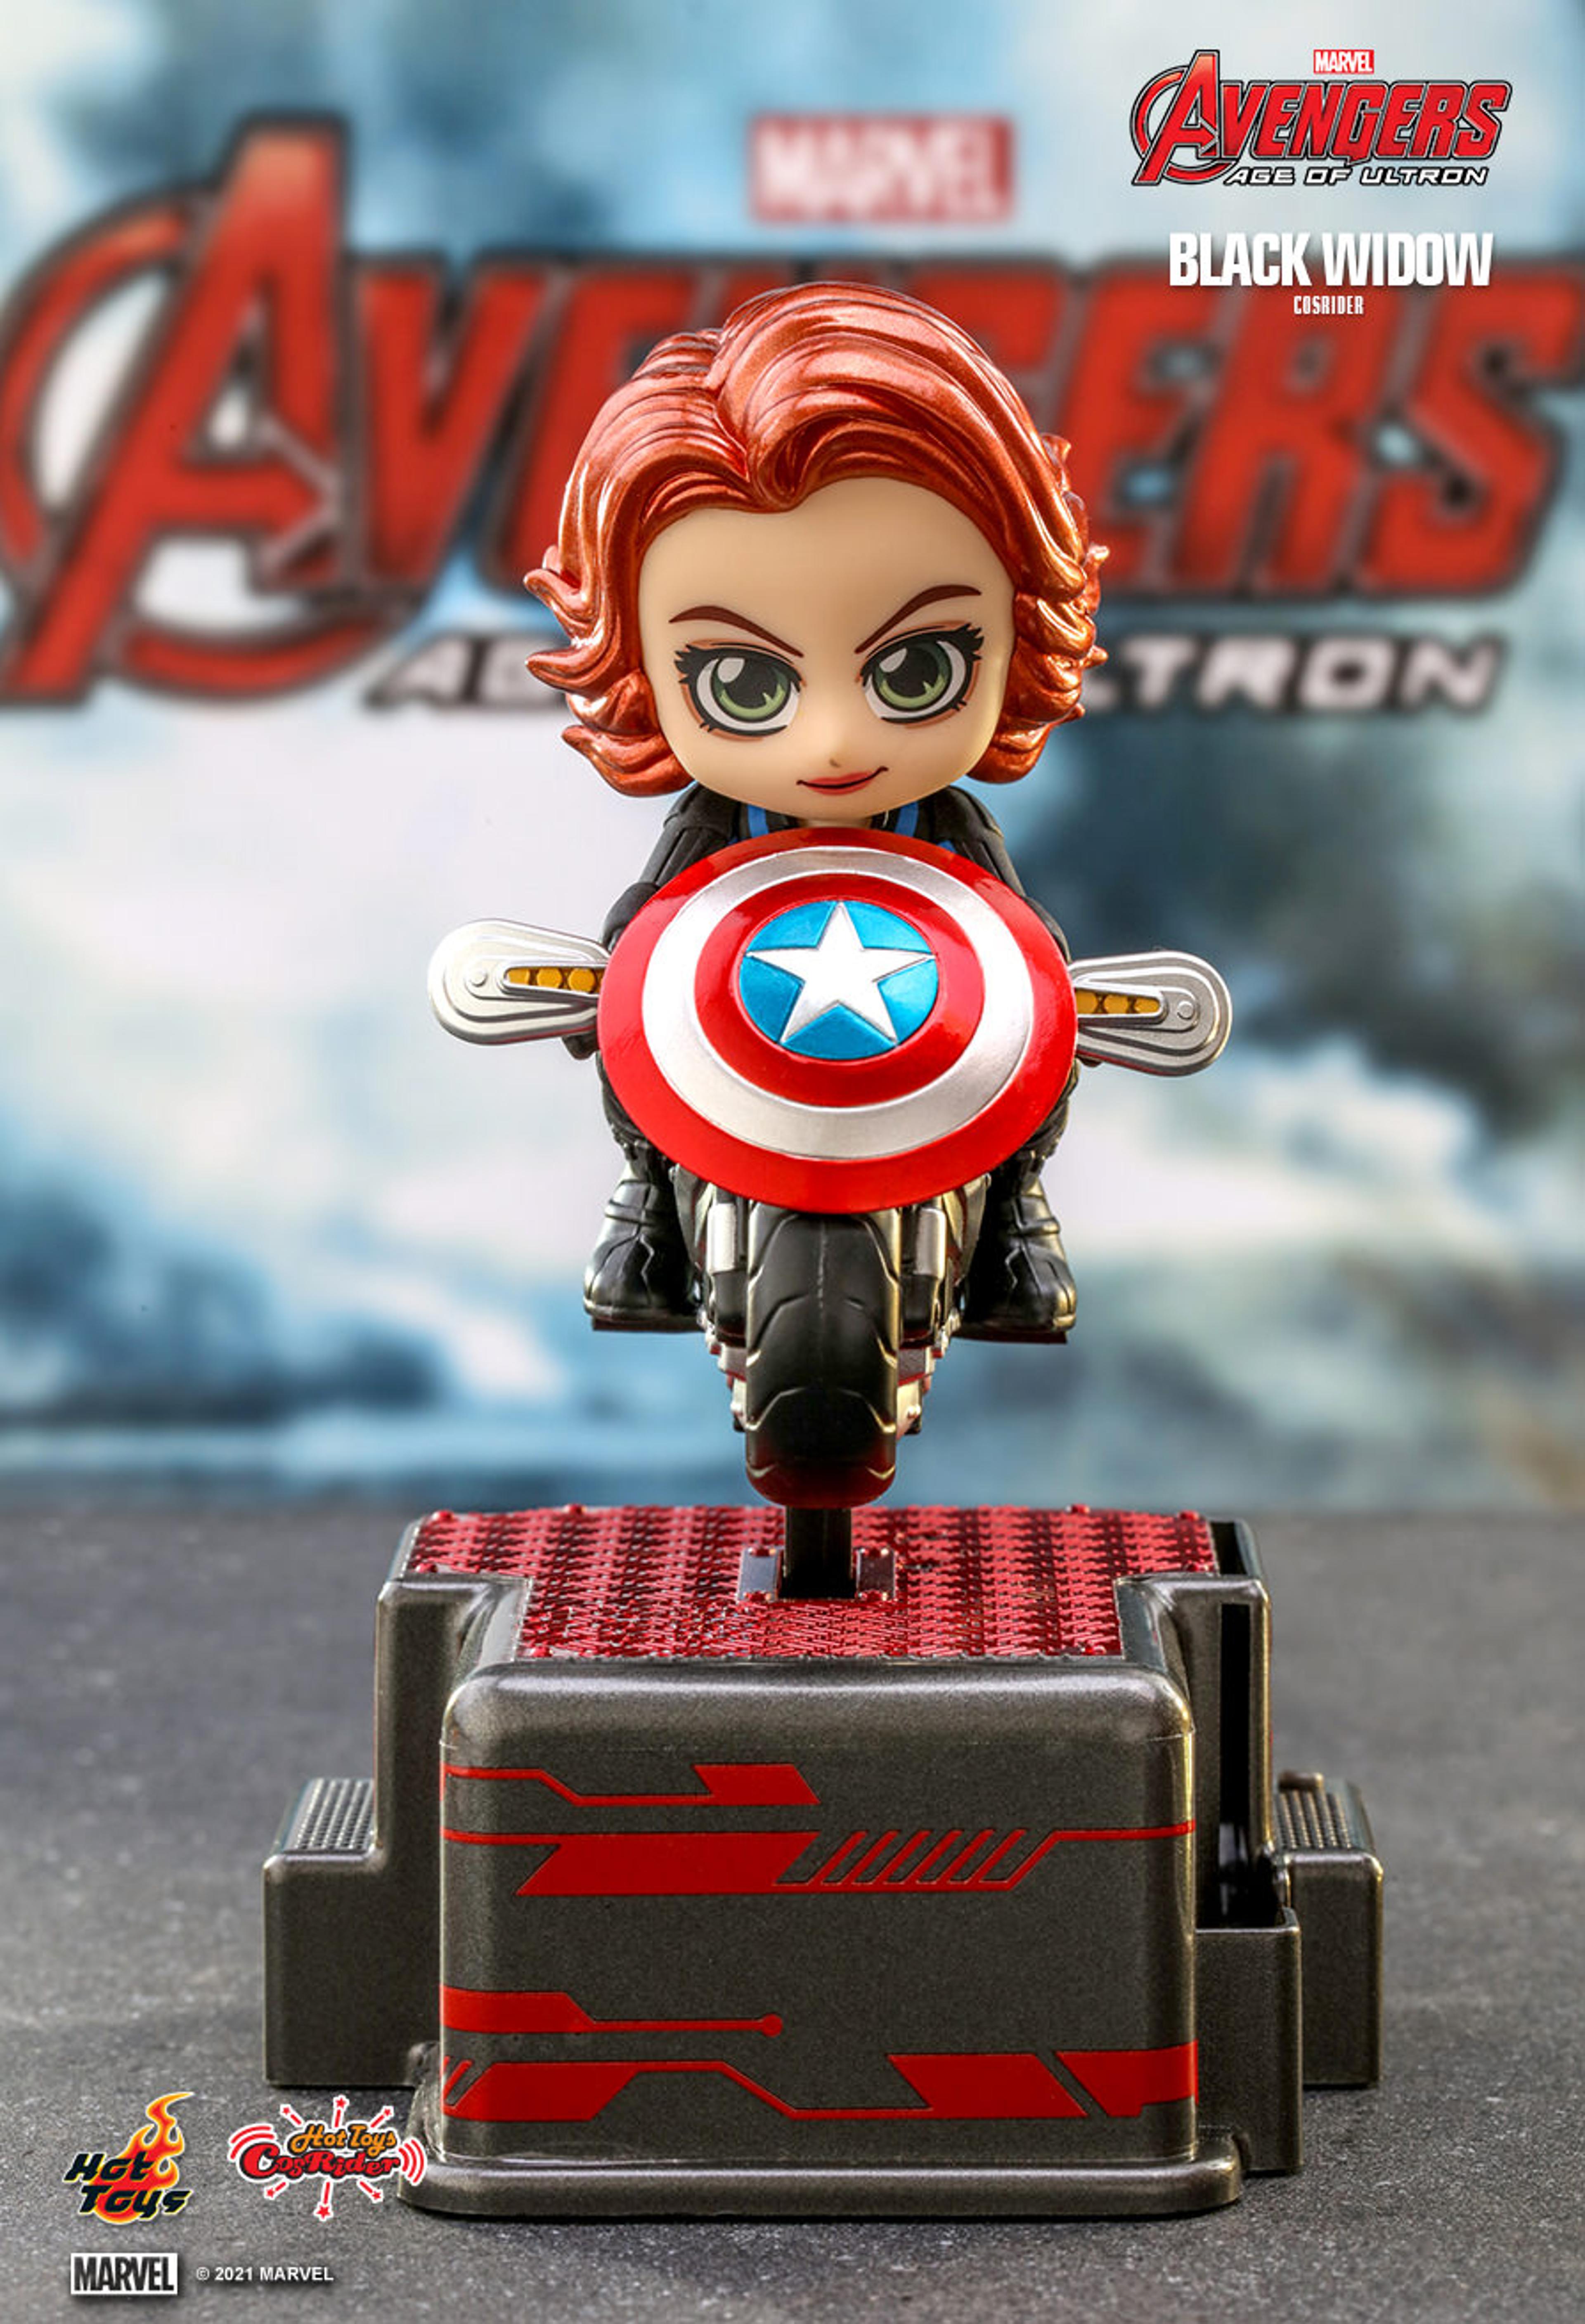 BLACK WIDOW Collectible Figure by Hot Toys